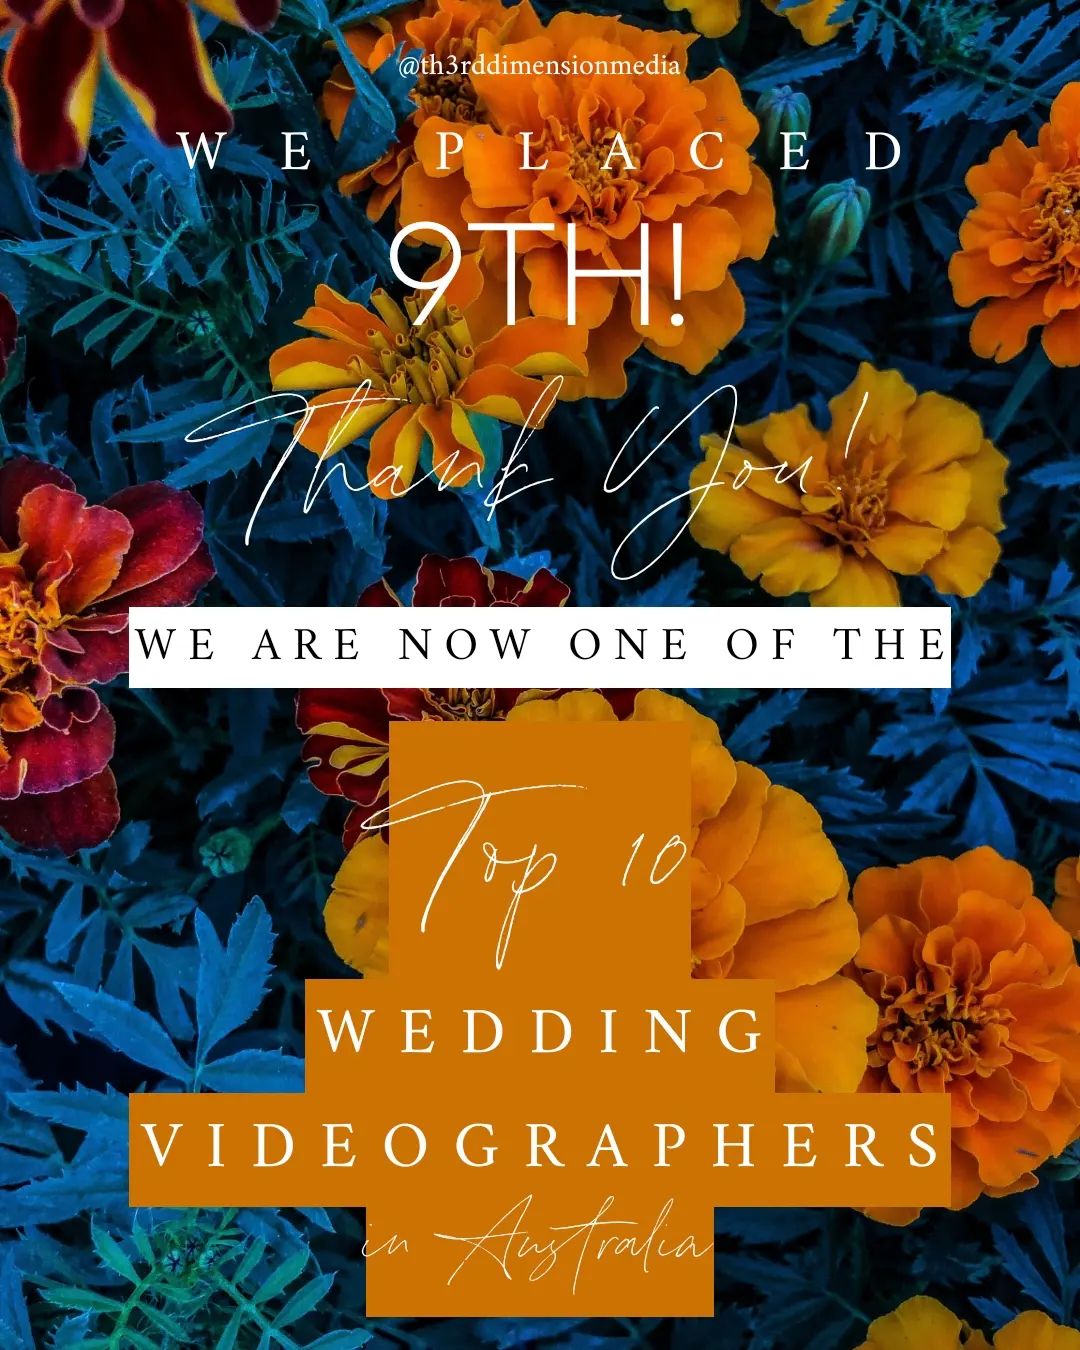 We are thrilled to share that we placed 9th in the ABIA Weddings Australia Designer of Dreams Awards. We are officially one of the Top 10 Wedding Videographers in AUSTRALIA! 
An amazing achievement given the affects of the pandemic on the wedding industry. We are excited for the future and we cannot thank our wonderful couples enough for your support, beautiful reviews and sharing your wedding days with us. 
Onwards and upwards - bring on our busiest ever wedding season! 🧡🧡